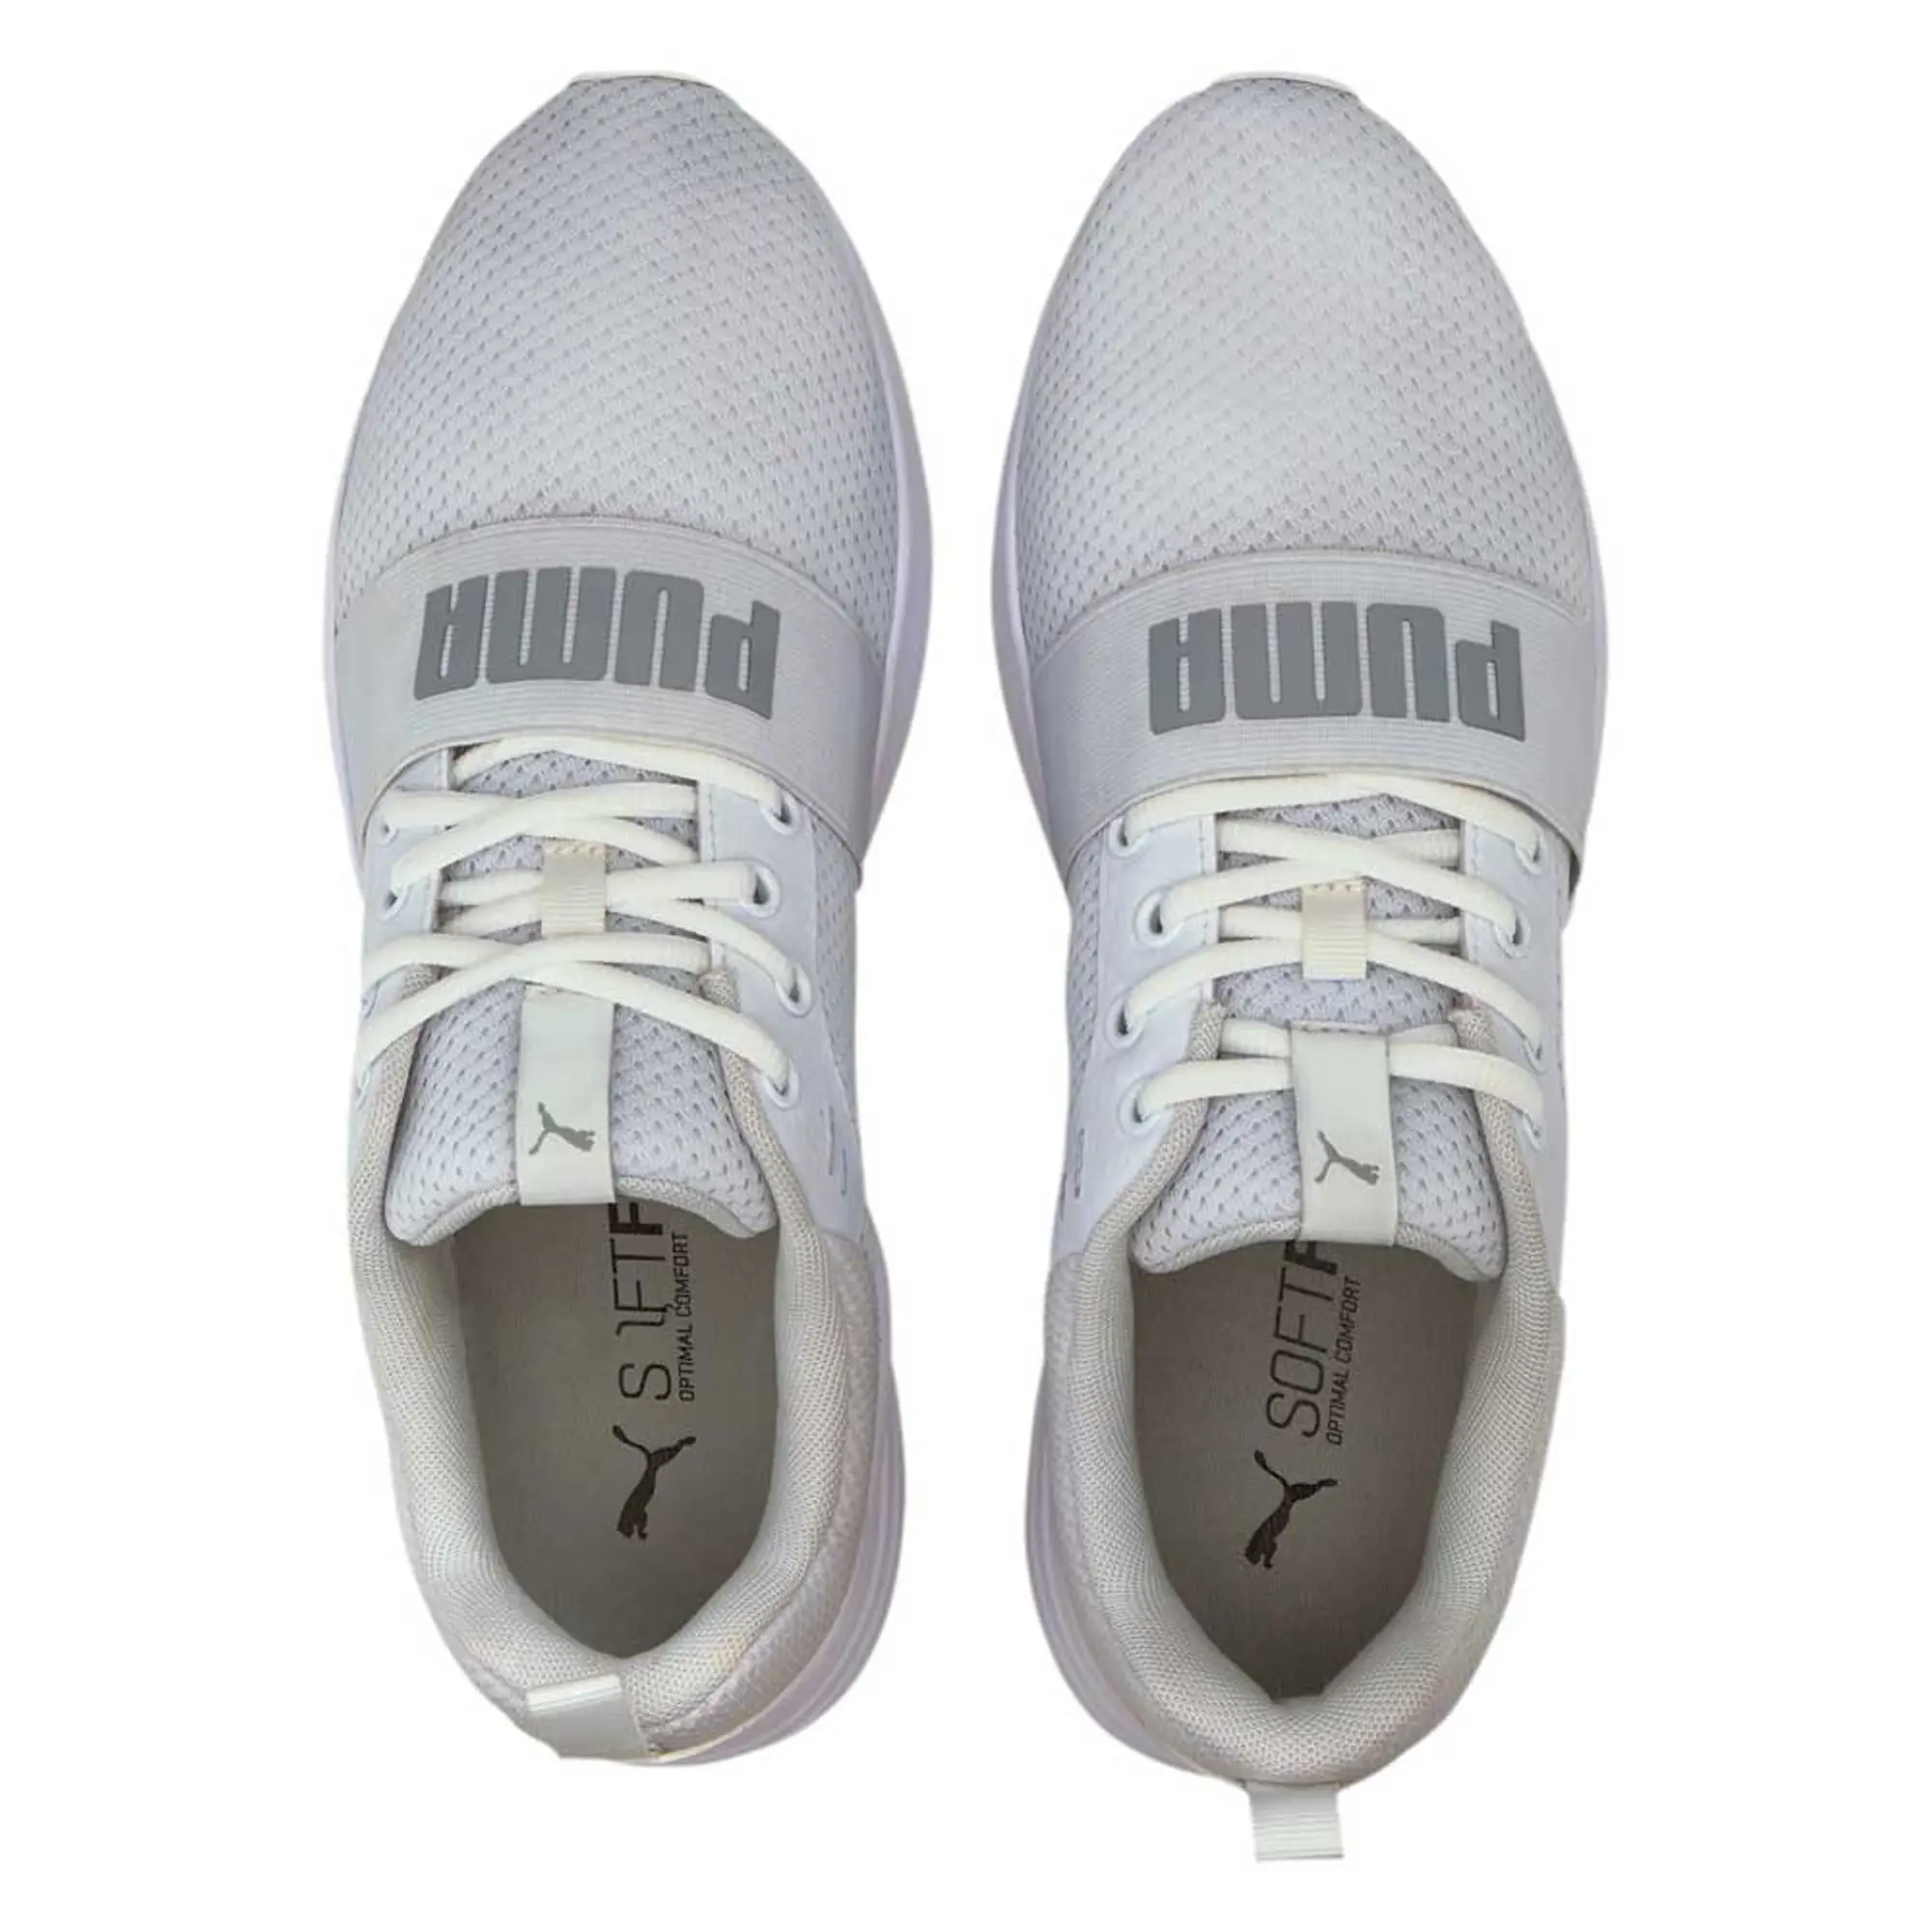 PUMA Wired Trainers, White/Grey Violet